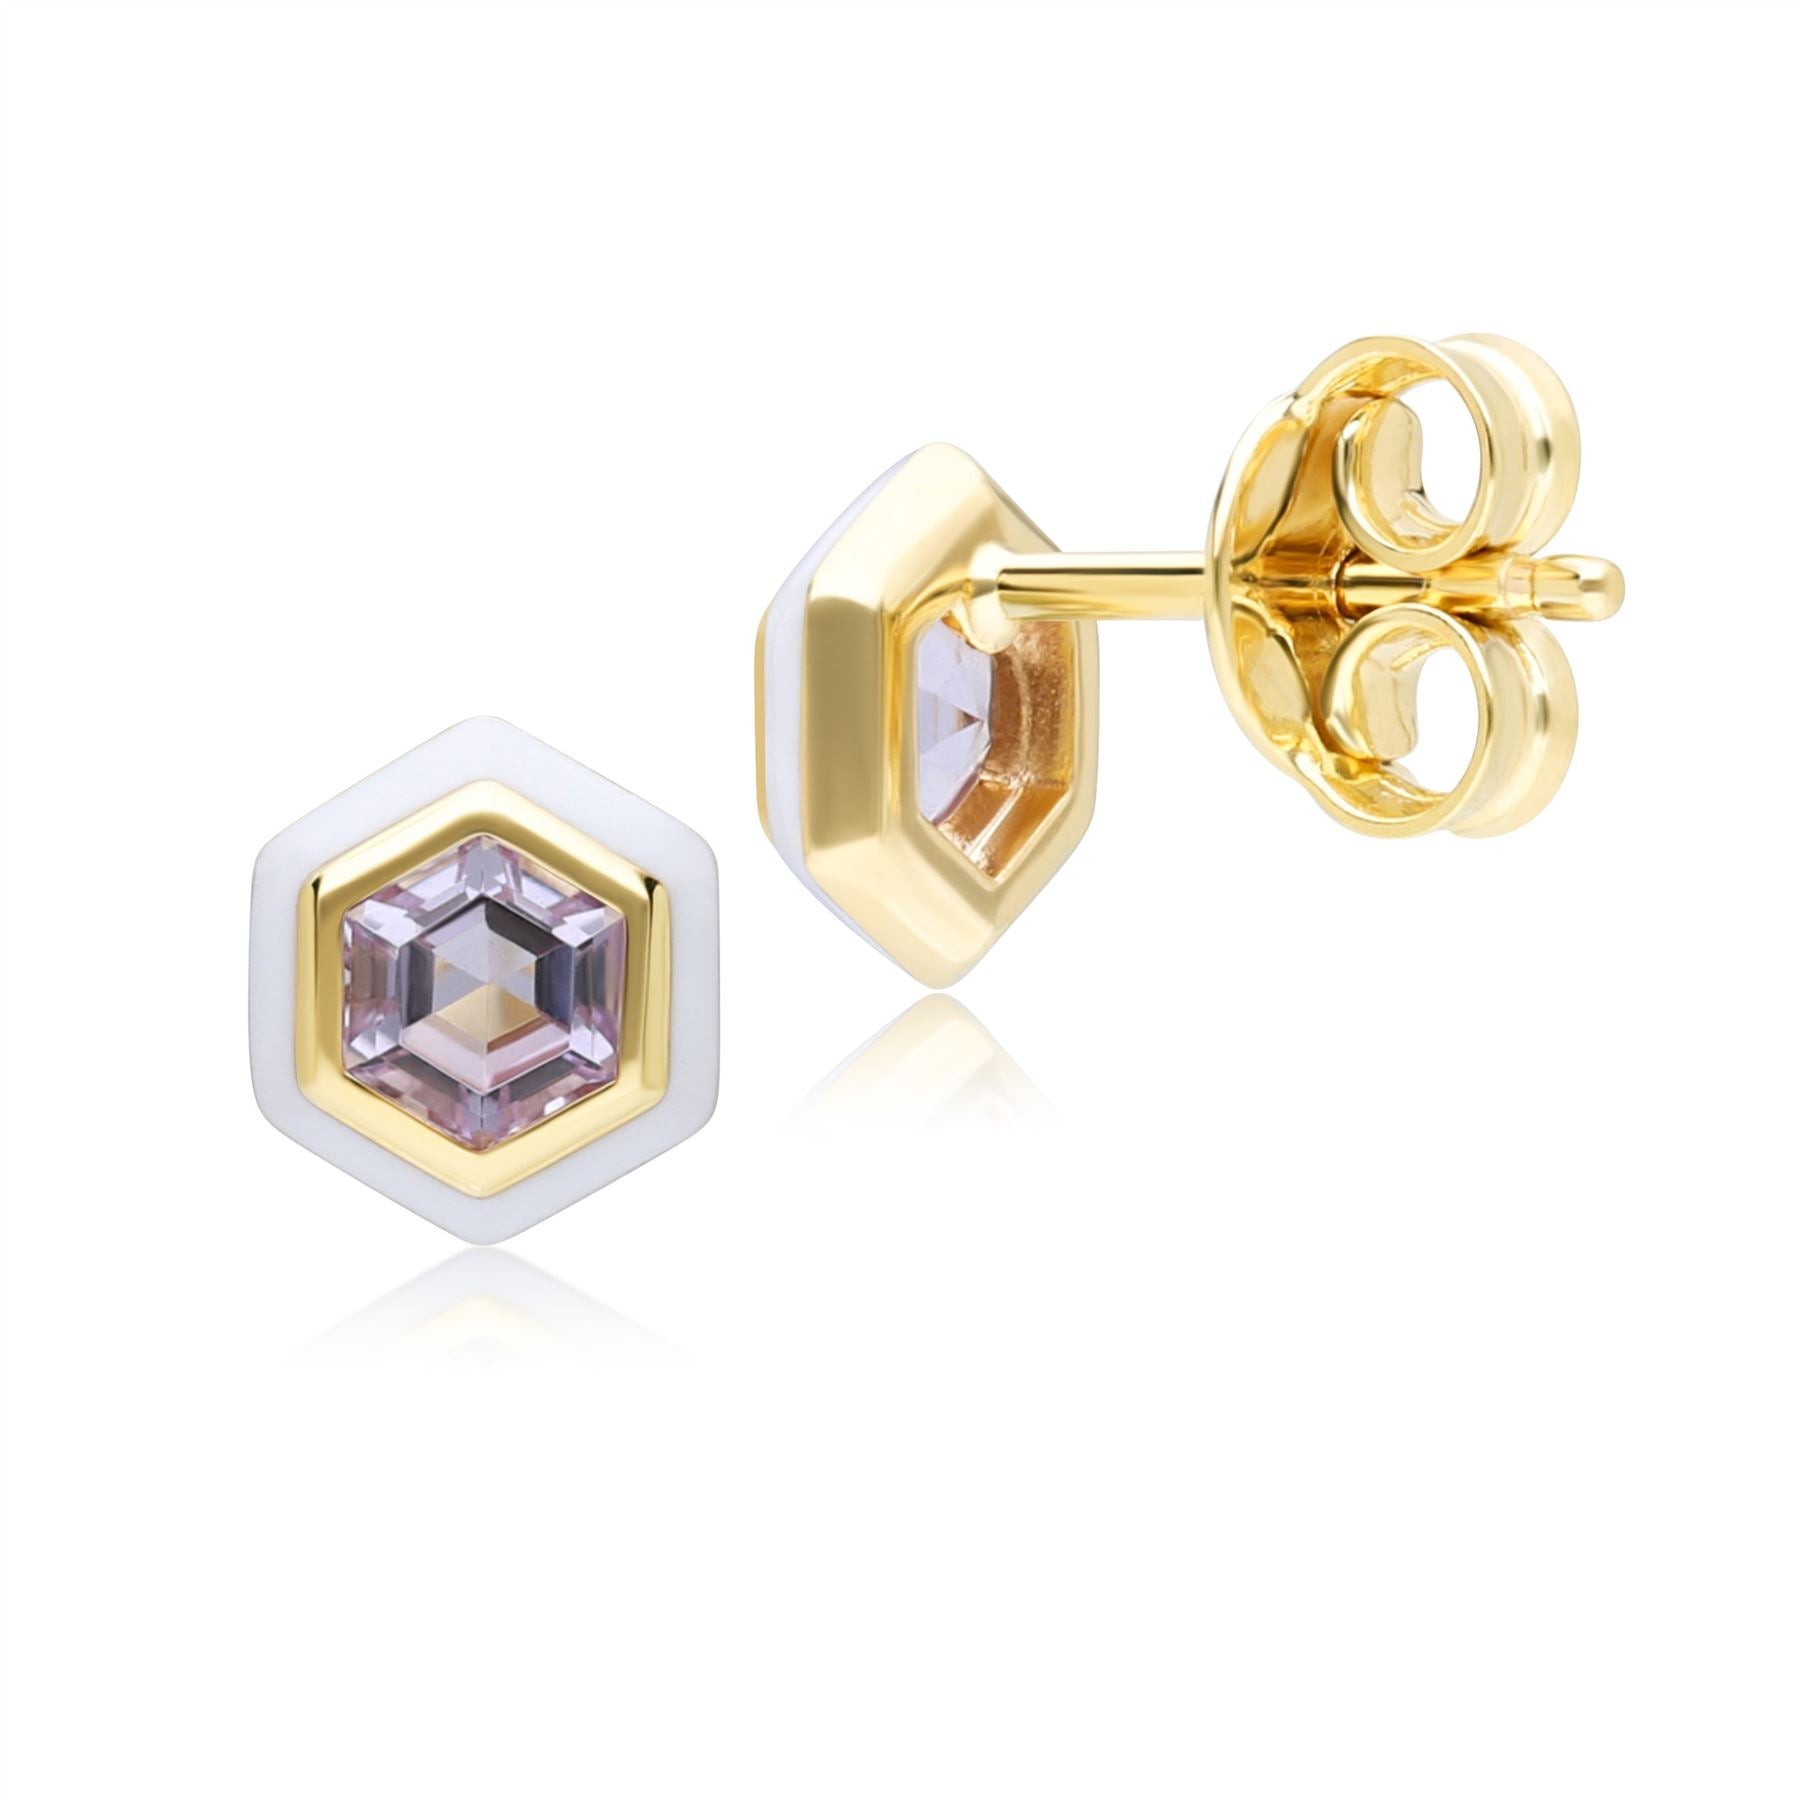 Geometric Hex Pink Amethyst and White Enamel Stud Earrings in Gold Plated Sterling Silver Back